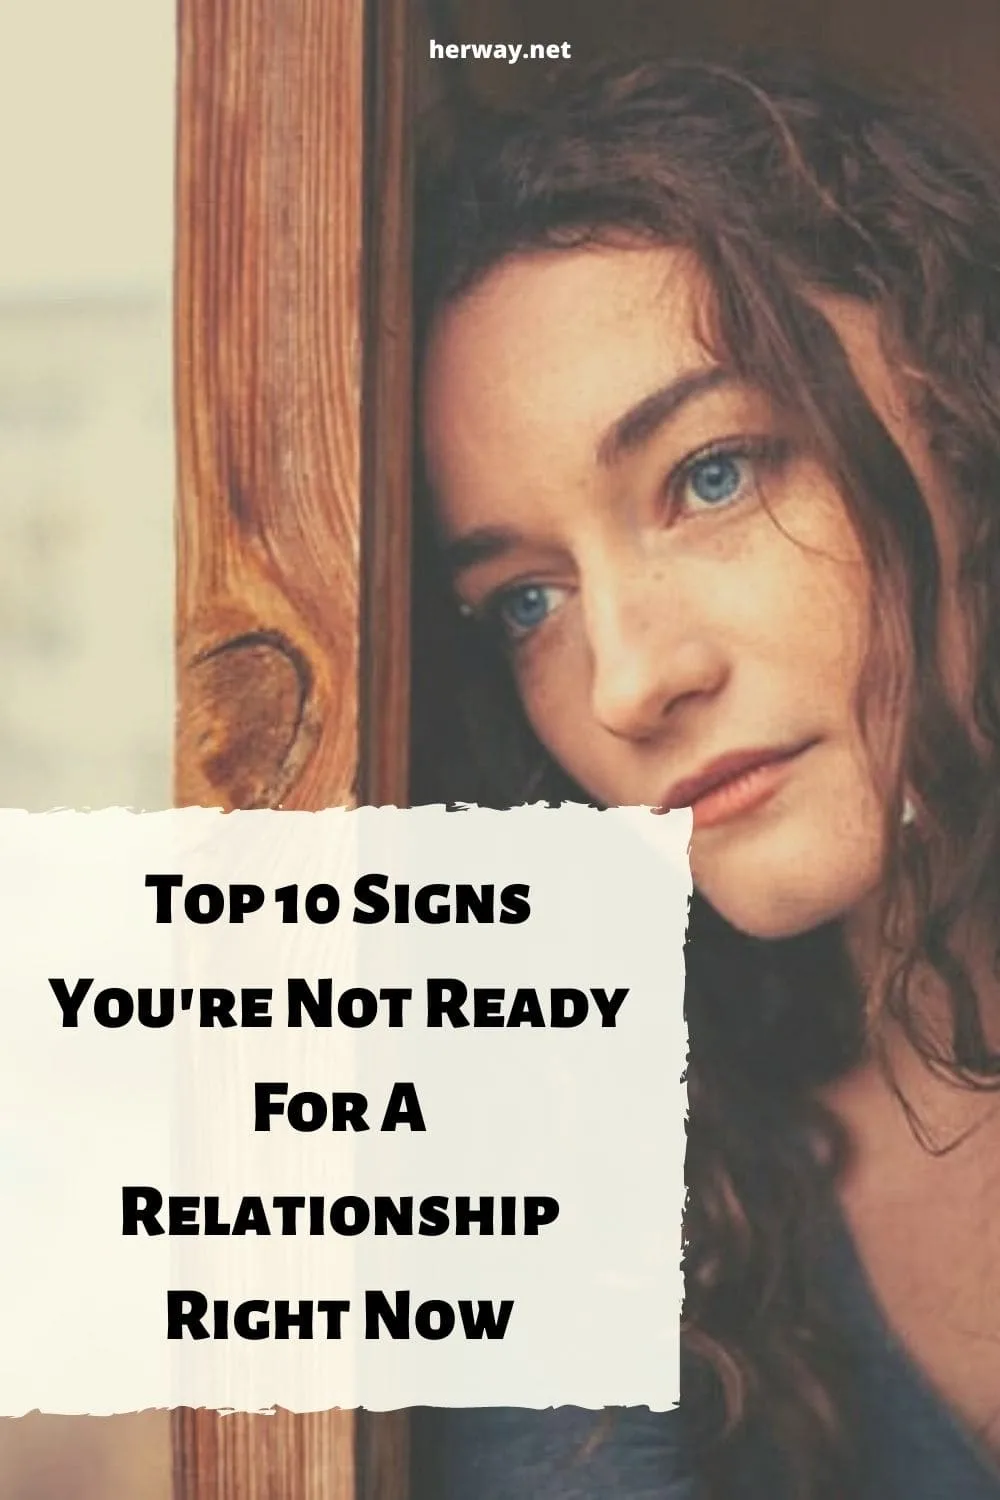 Top 10 Signs You're Not Ready For A Relationship Right Now